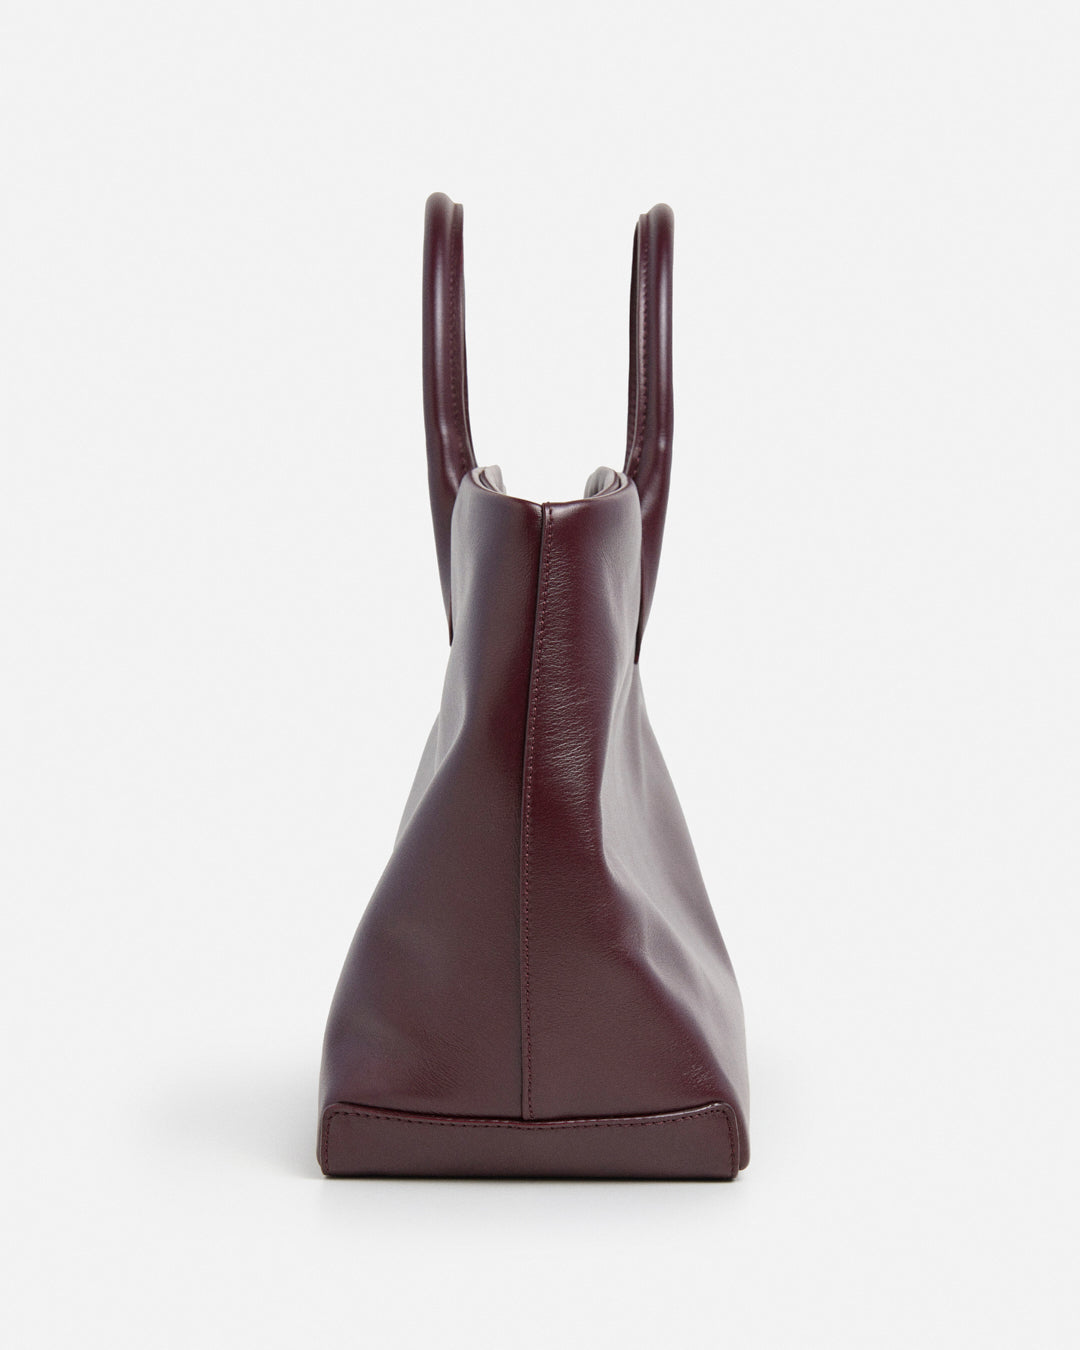 Lola Tote Leather Patent Burgundy